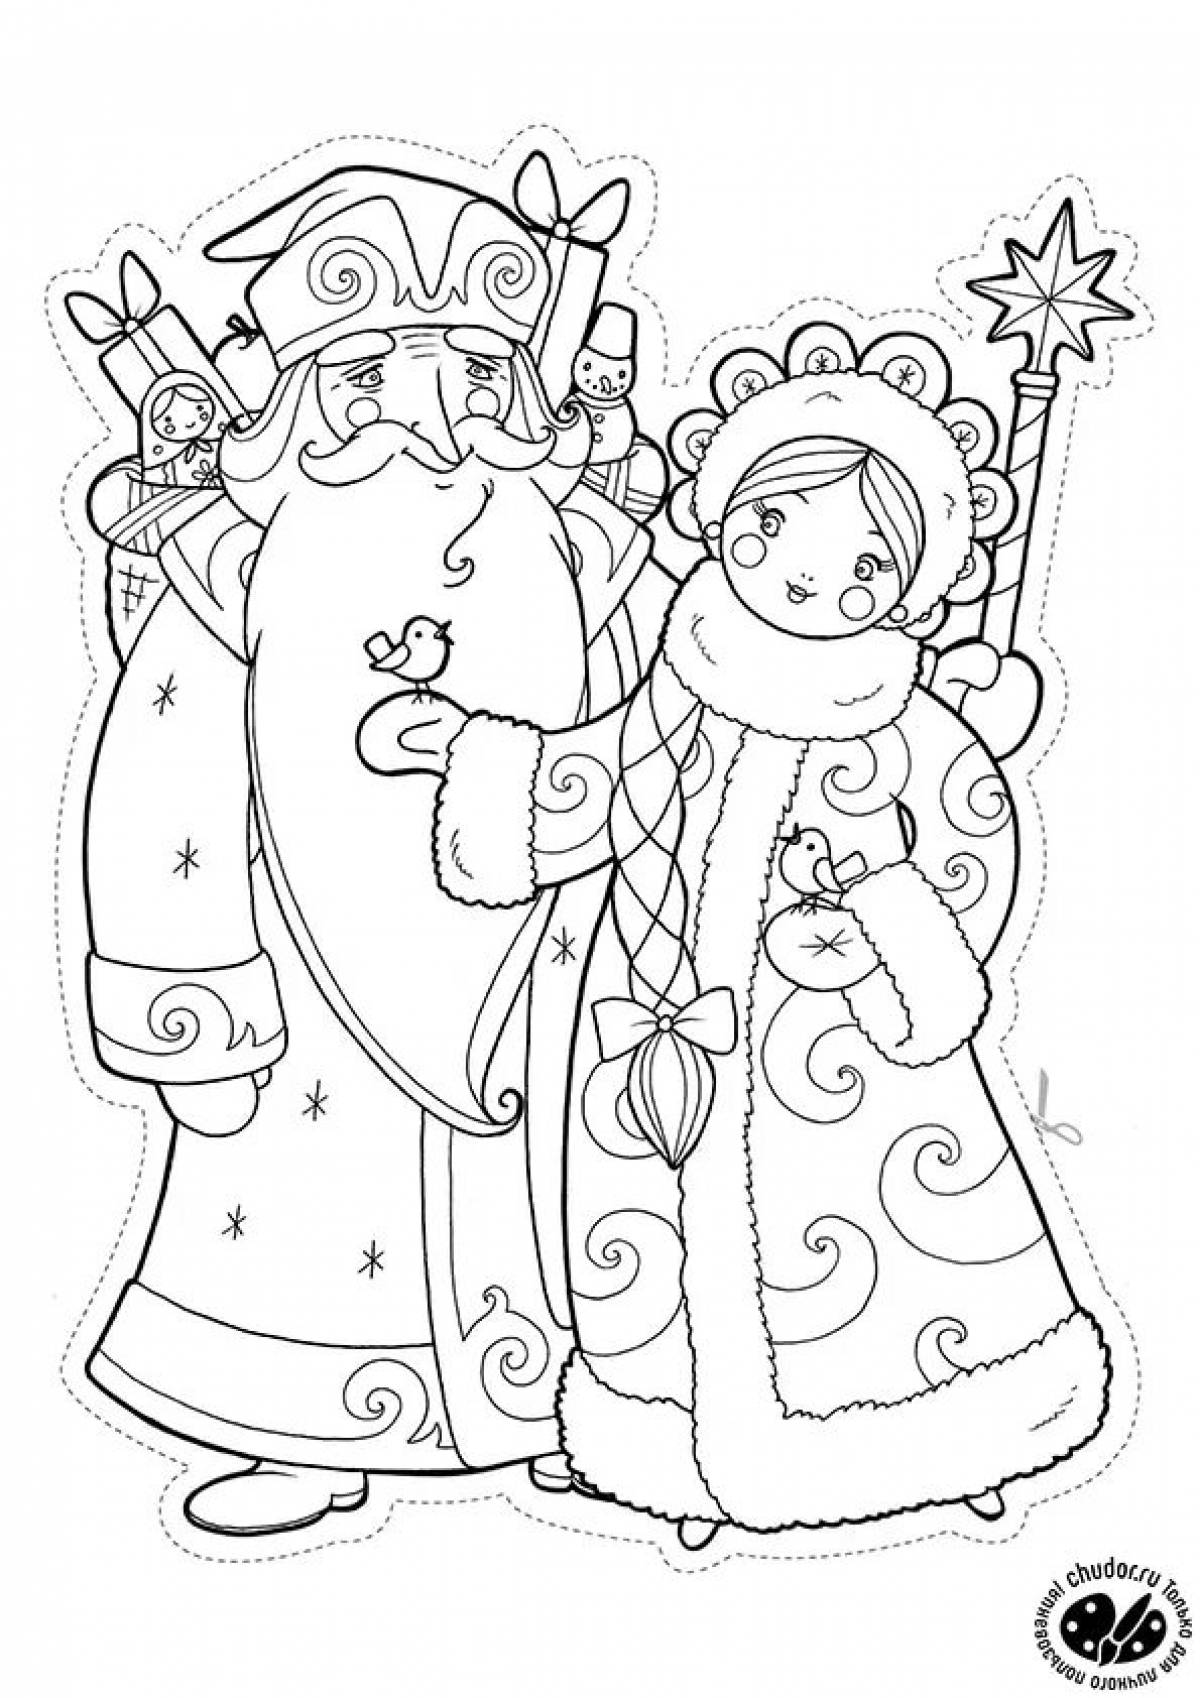 Exciting drawing of Santa Claus and Snow Maiden